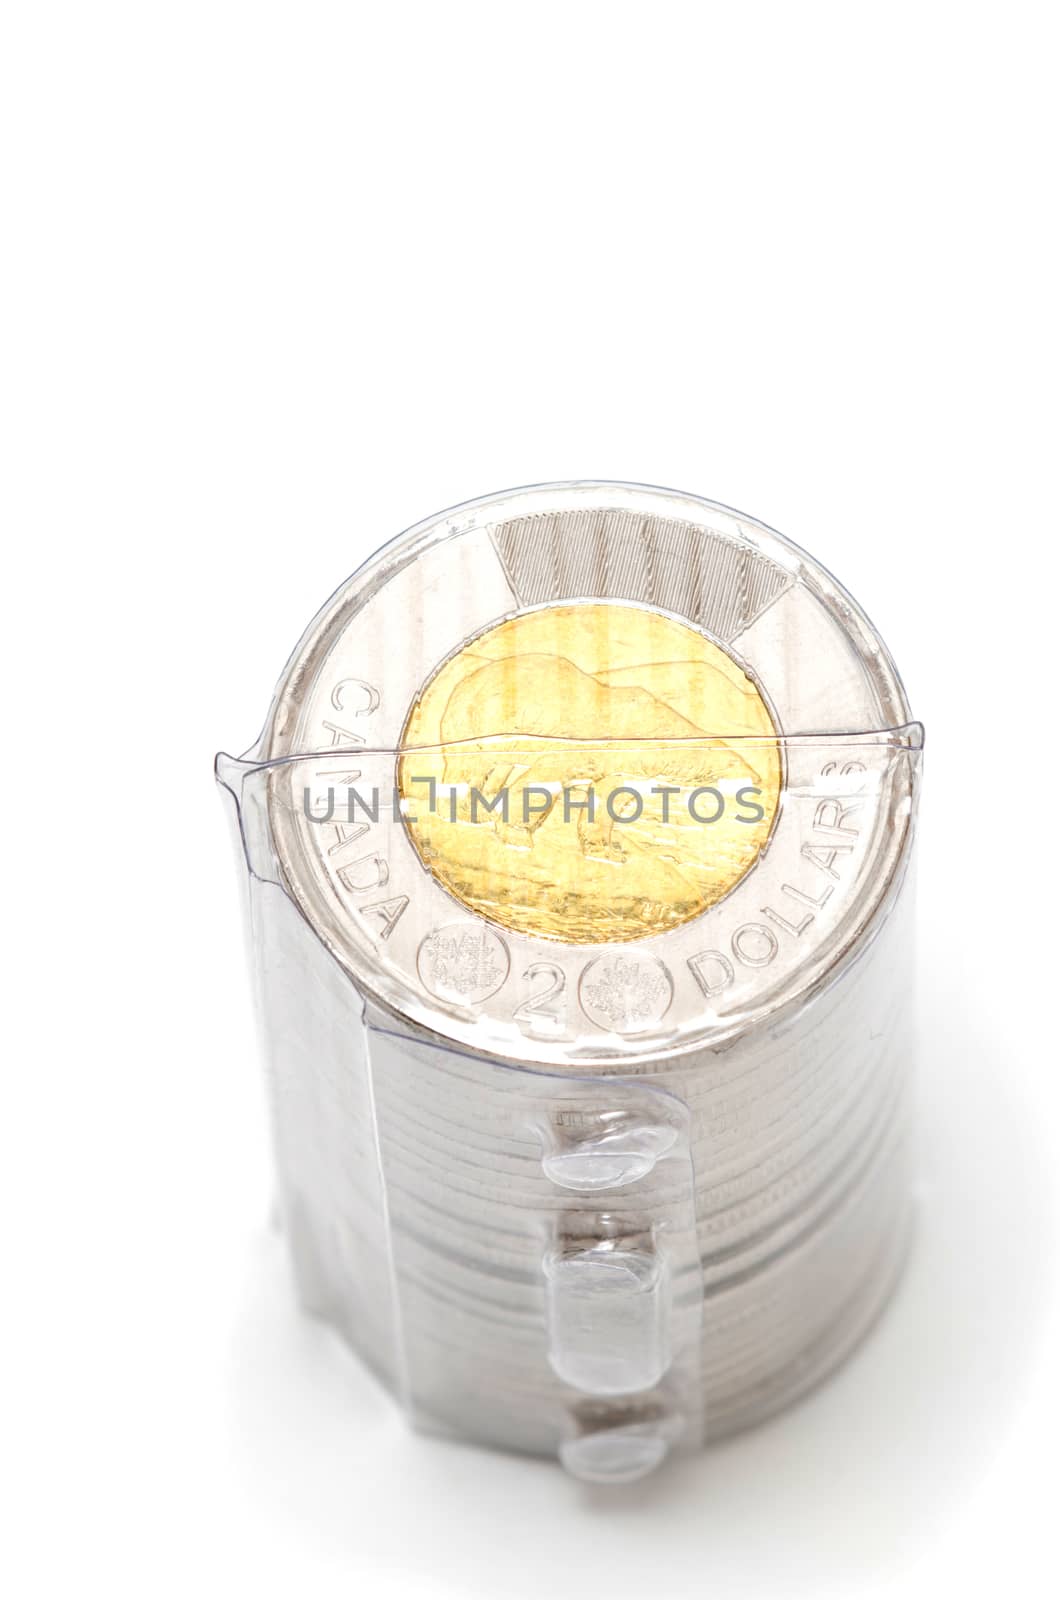 Plastic roll holding two dollar coins on white background